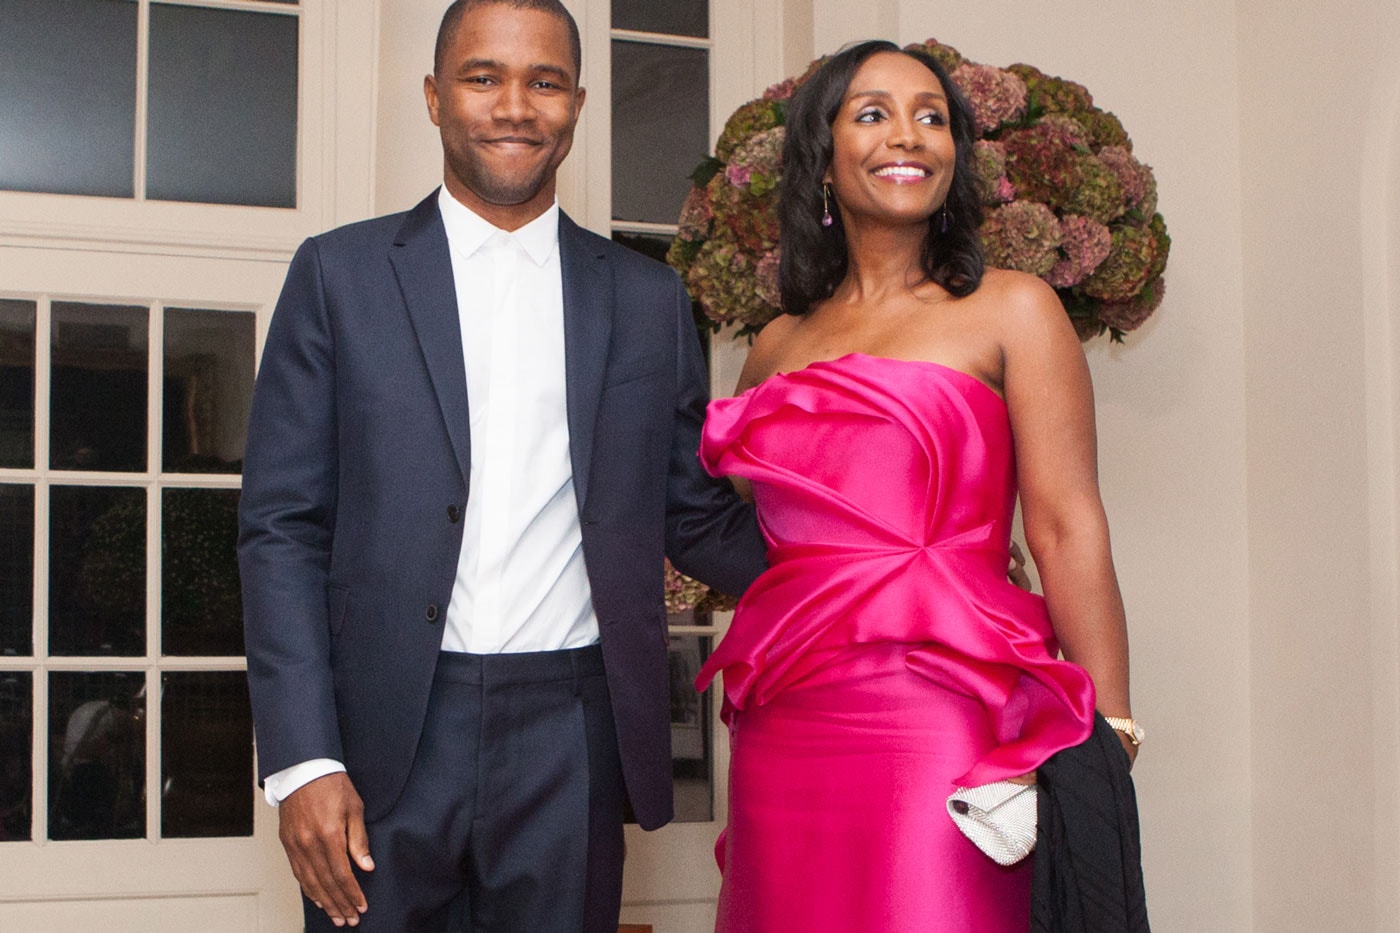 Frank Ocean On Why He Wore Vans to the White House Dinner first interview in three years